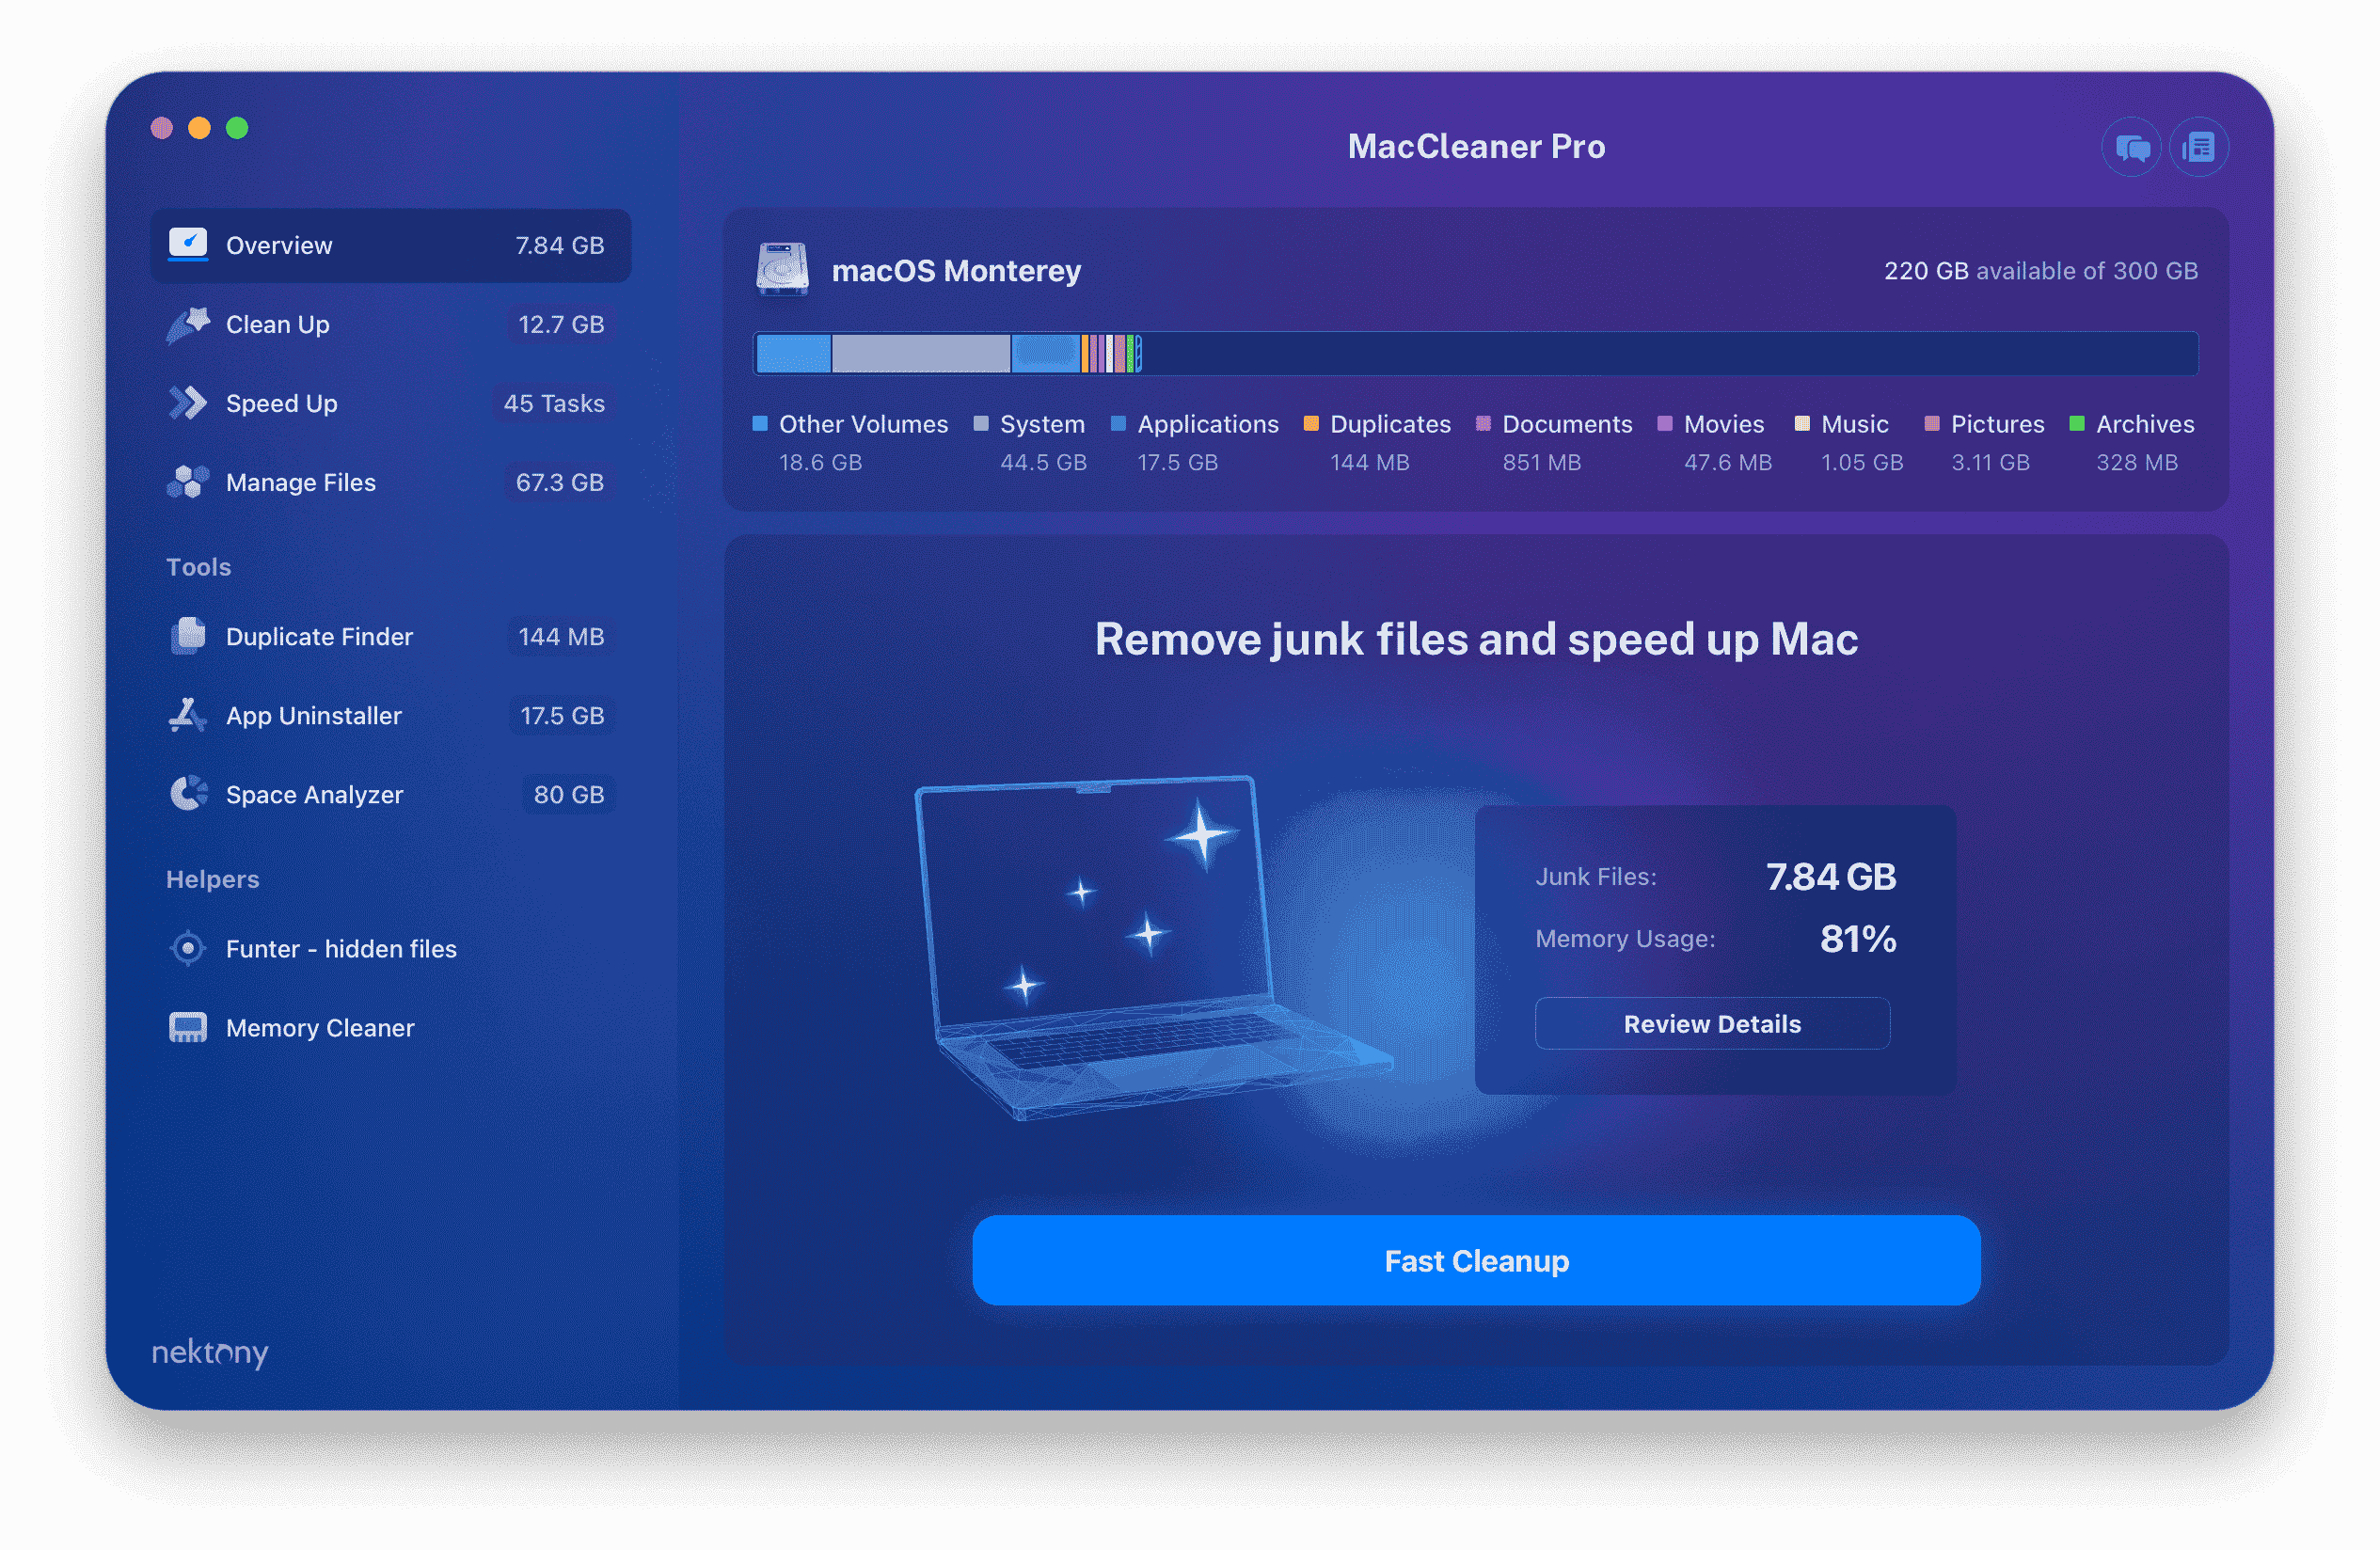 MacCleaner Pro overview tab